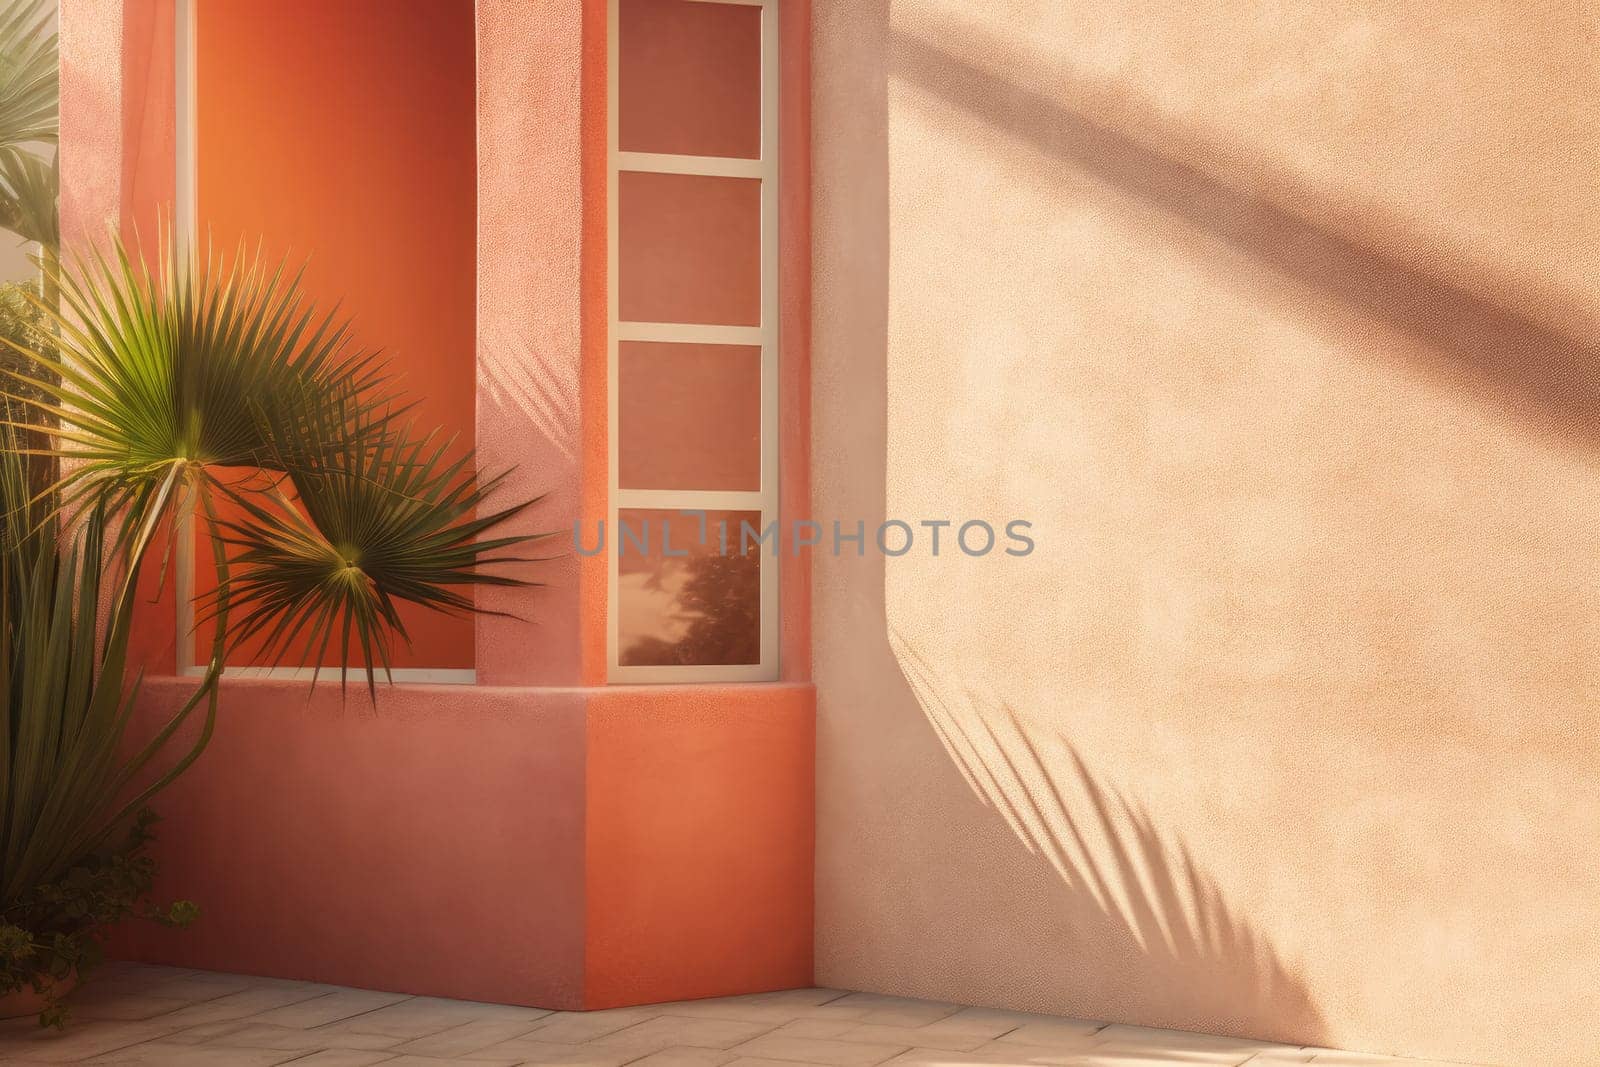 Background for your product. Plastered wall, plant and shadows